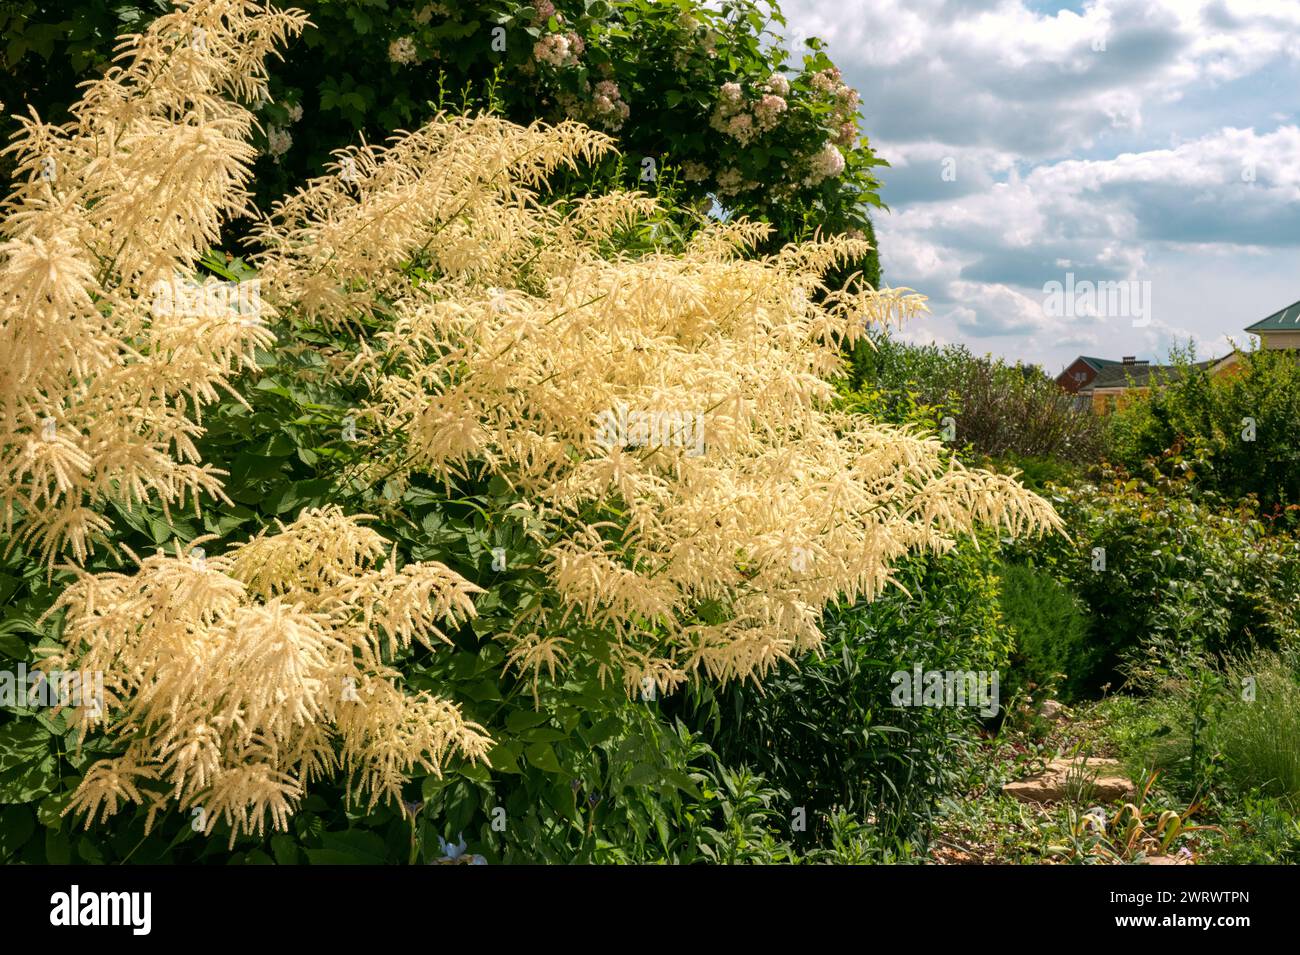 Aruncus dioicus, forest, is a beautiful, stout herb, our native. It grows to a height of up to 1m. From June to the end of the wonderful large laths o Stock Photo